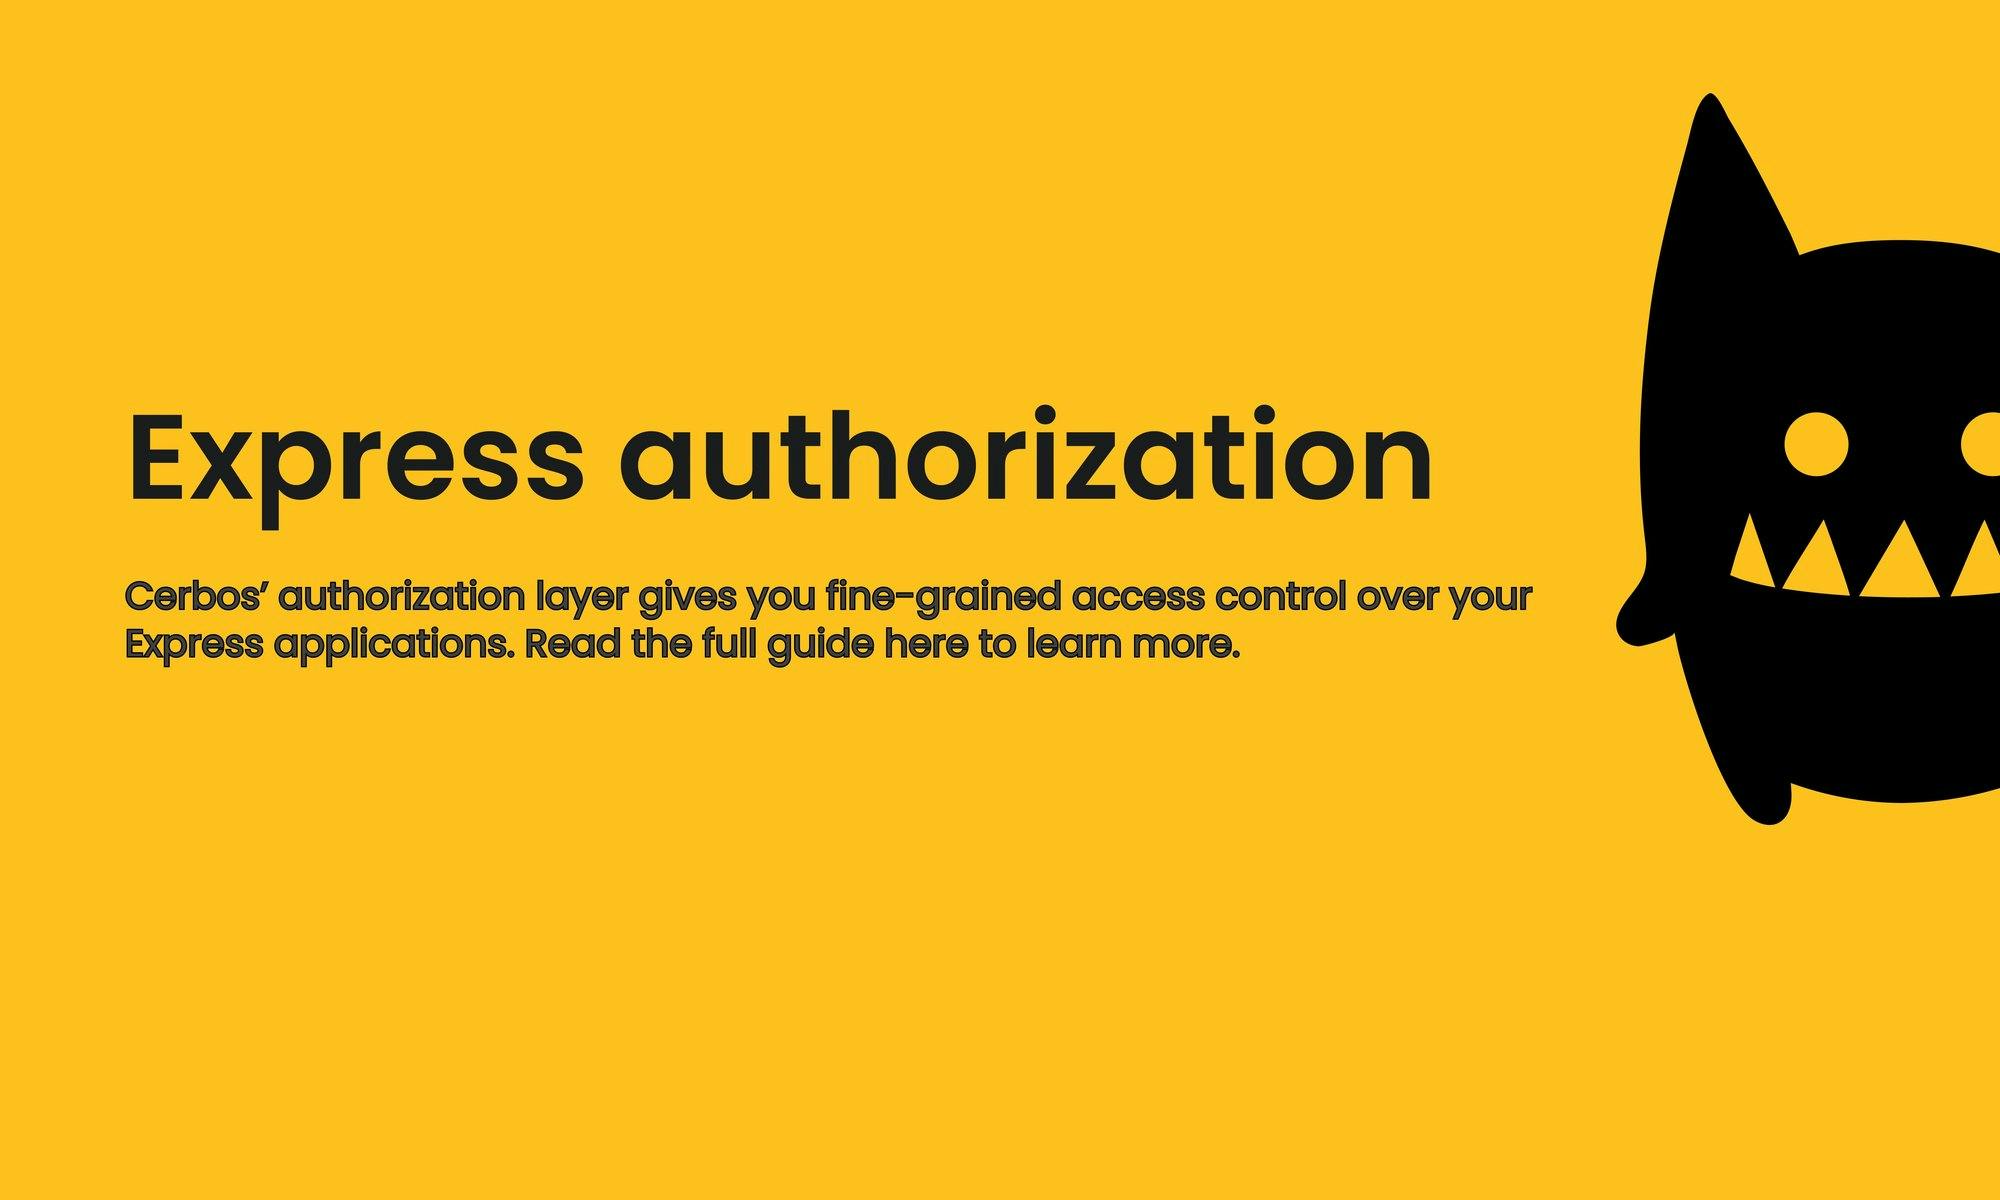 Express authorization: Scalable authorization for applications